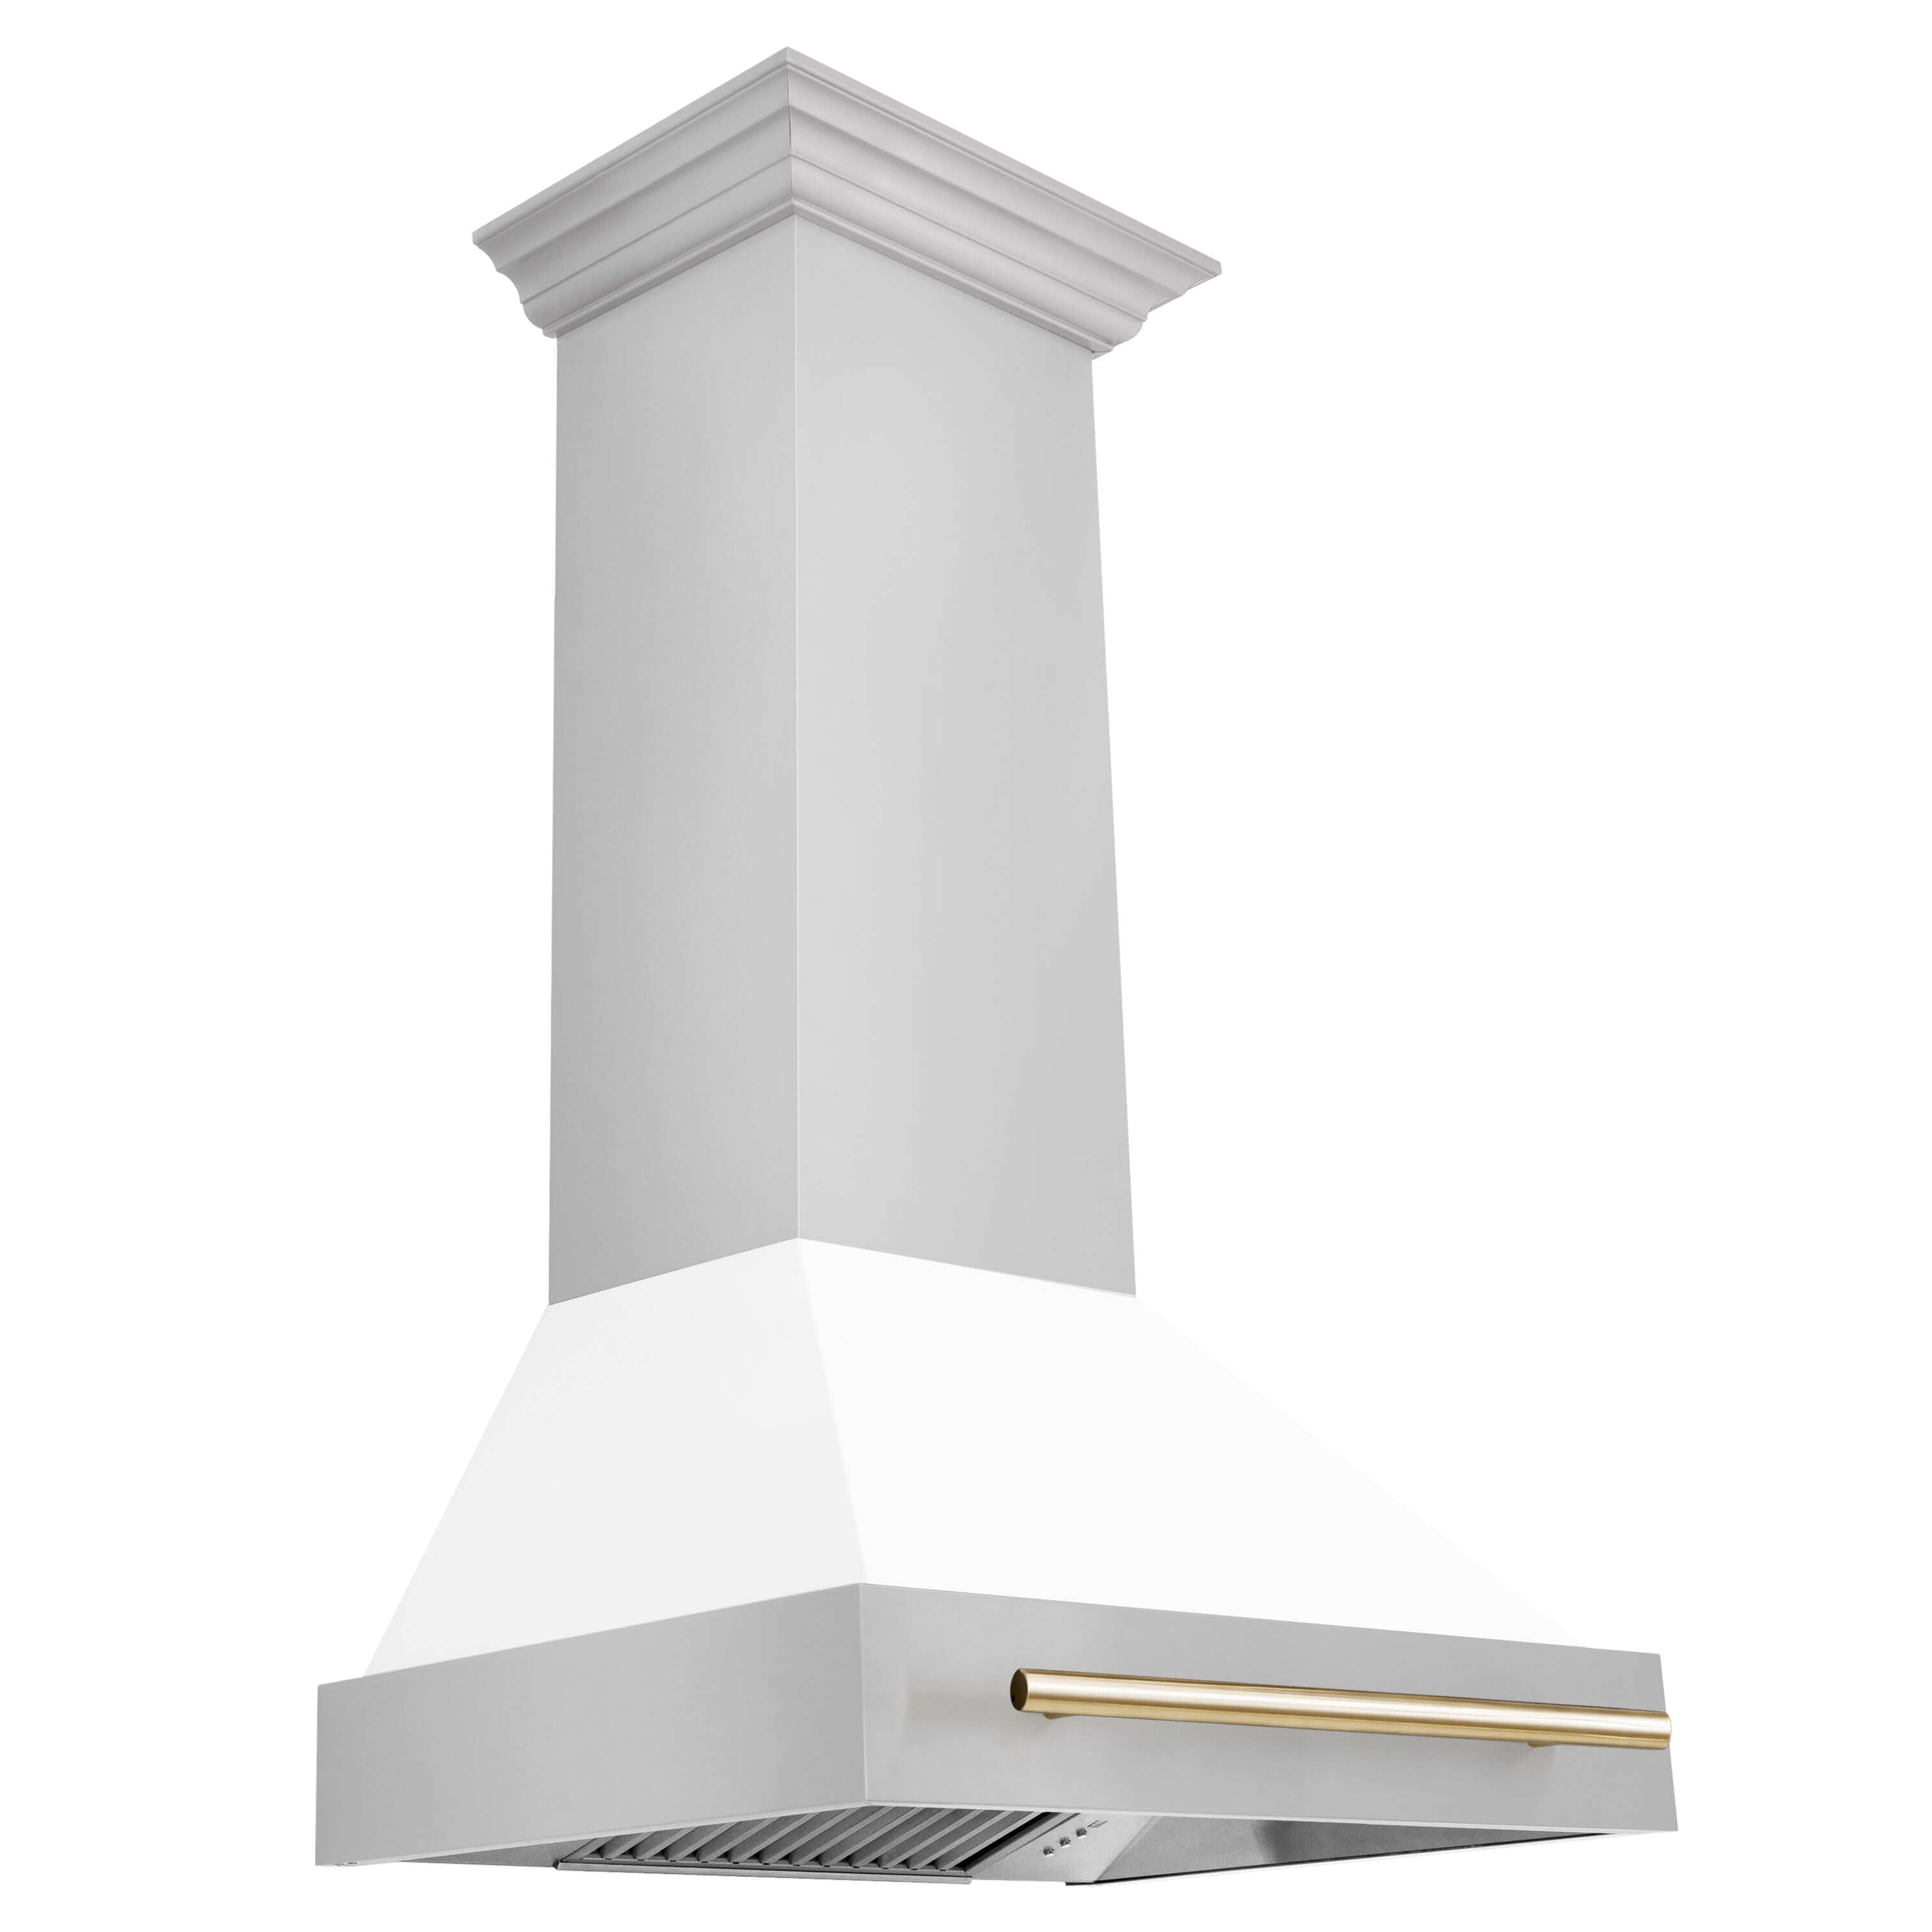 ZLINE Autograph Edition 30" Range Hood with White Matte Shell and Polished Gold accents (8654STZ-WM30-G)